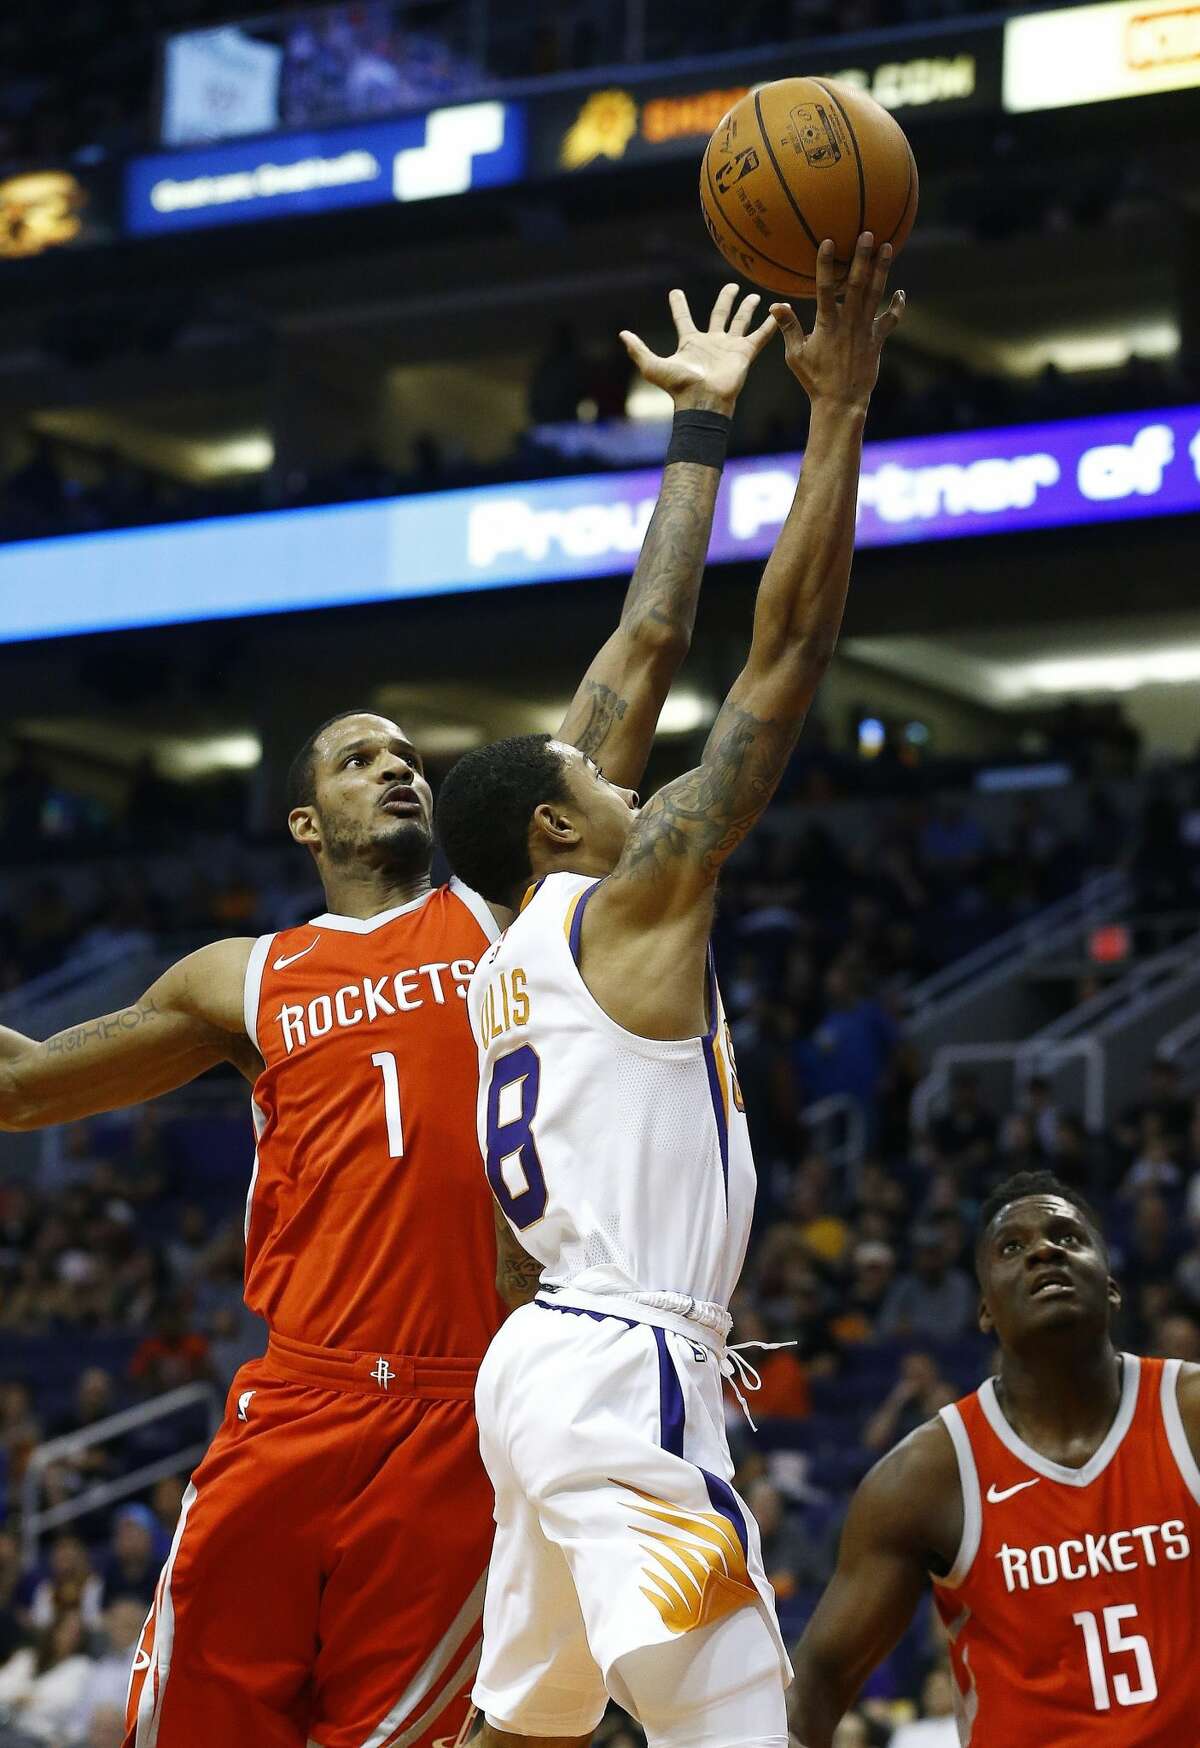 Houston Rockets forward Trevor Ariza (1) jumps to block the shot of Phoenix Suns guard Tyler Ulis (8) as Rockets center Clint Capela (15) watches during the second half of an NBA basketball game Thursday, Nov. 16, 2017, in Phoenix. The Rockets defeated the Suns 142-116. (AP Photo/Ross D. Franklin)